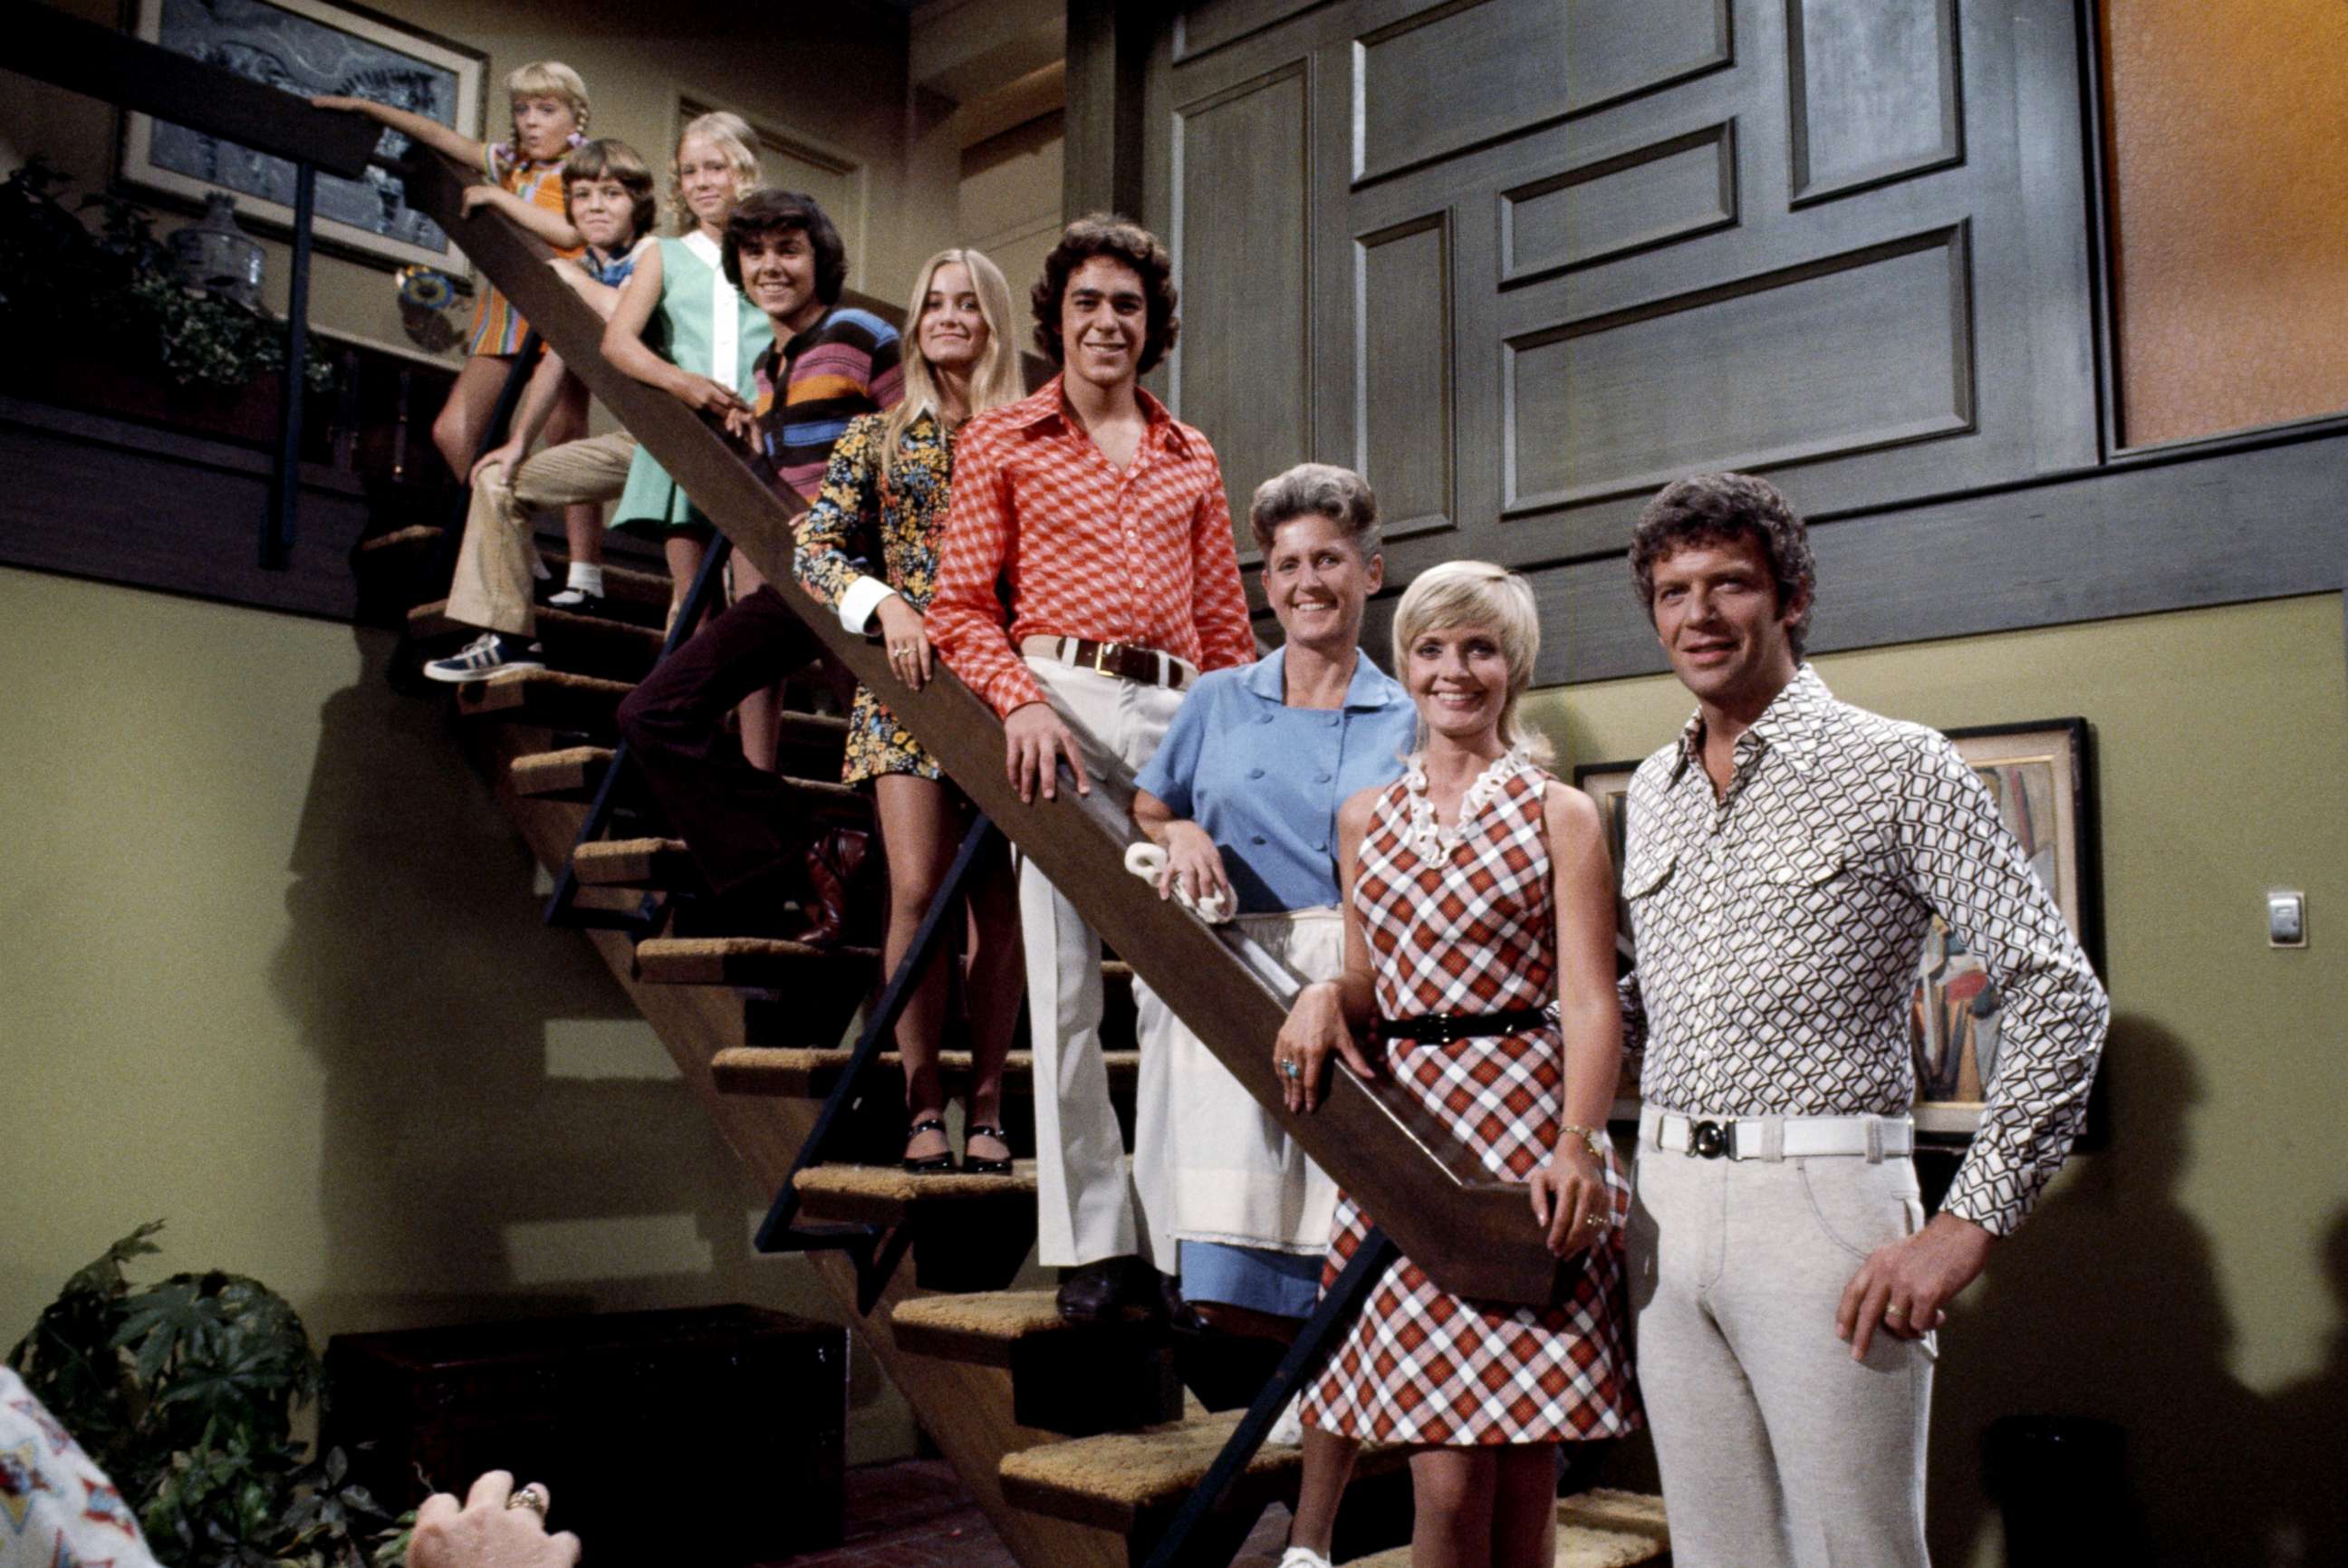 PHOTO: A scene from the show "The Brady Bunch," Aug. 27, 1969.